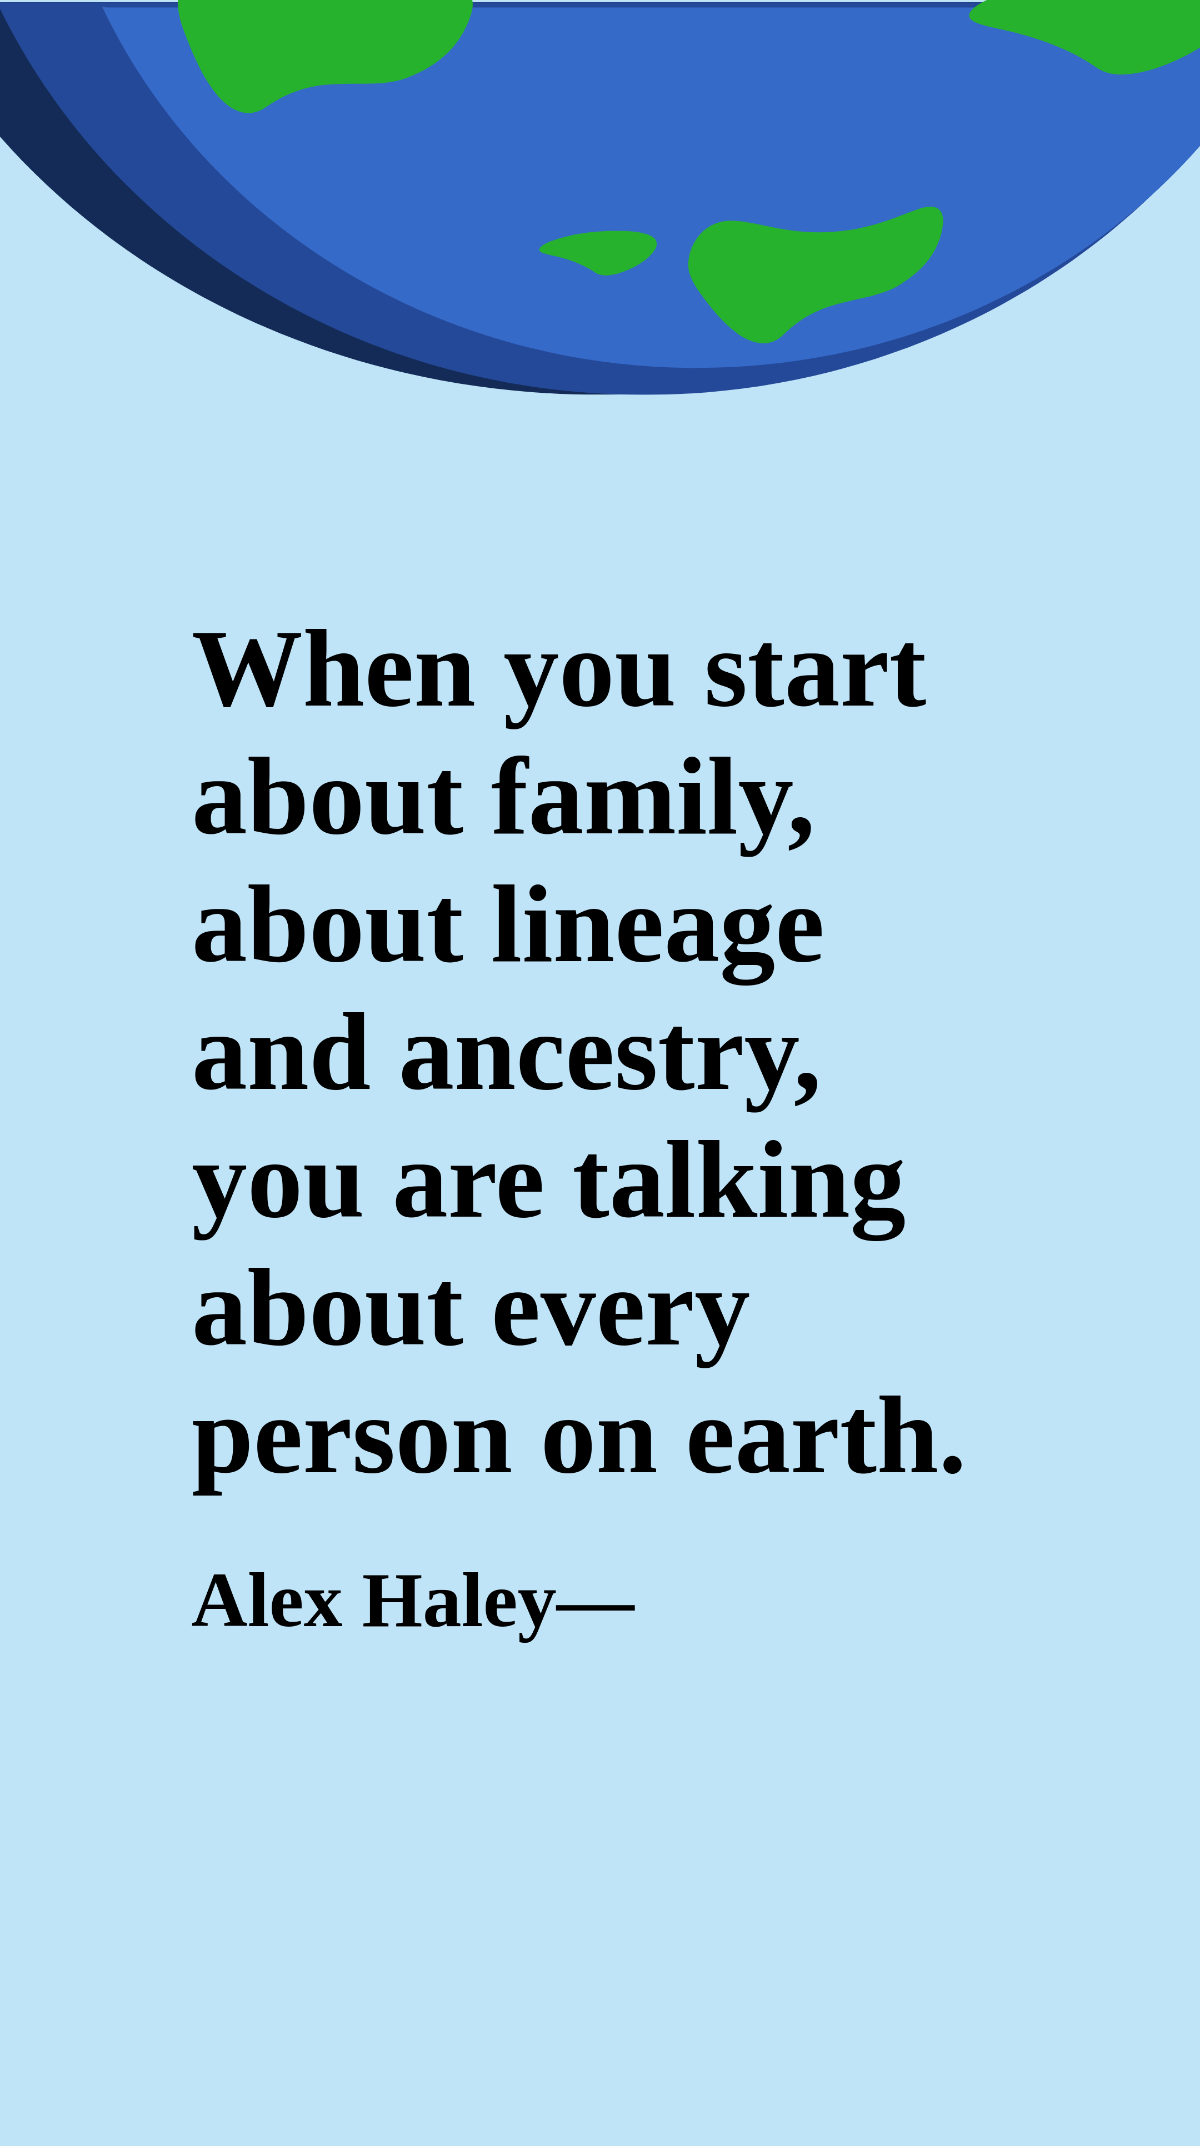 Free Alex Haley - When you start about family, about lineage and ancestry, you are talking about every person on earth. Template